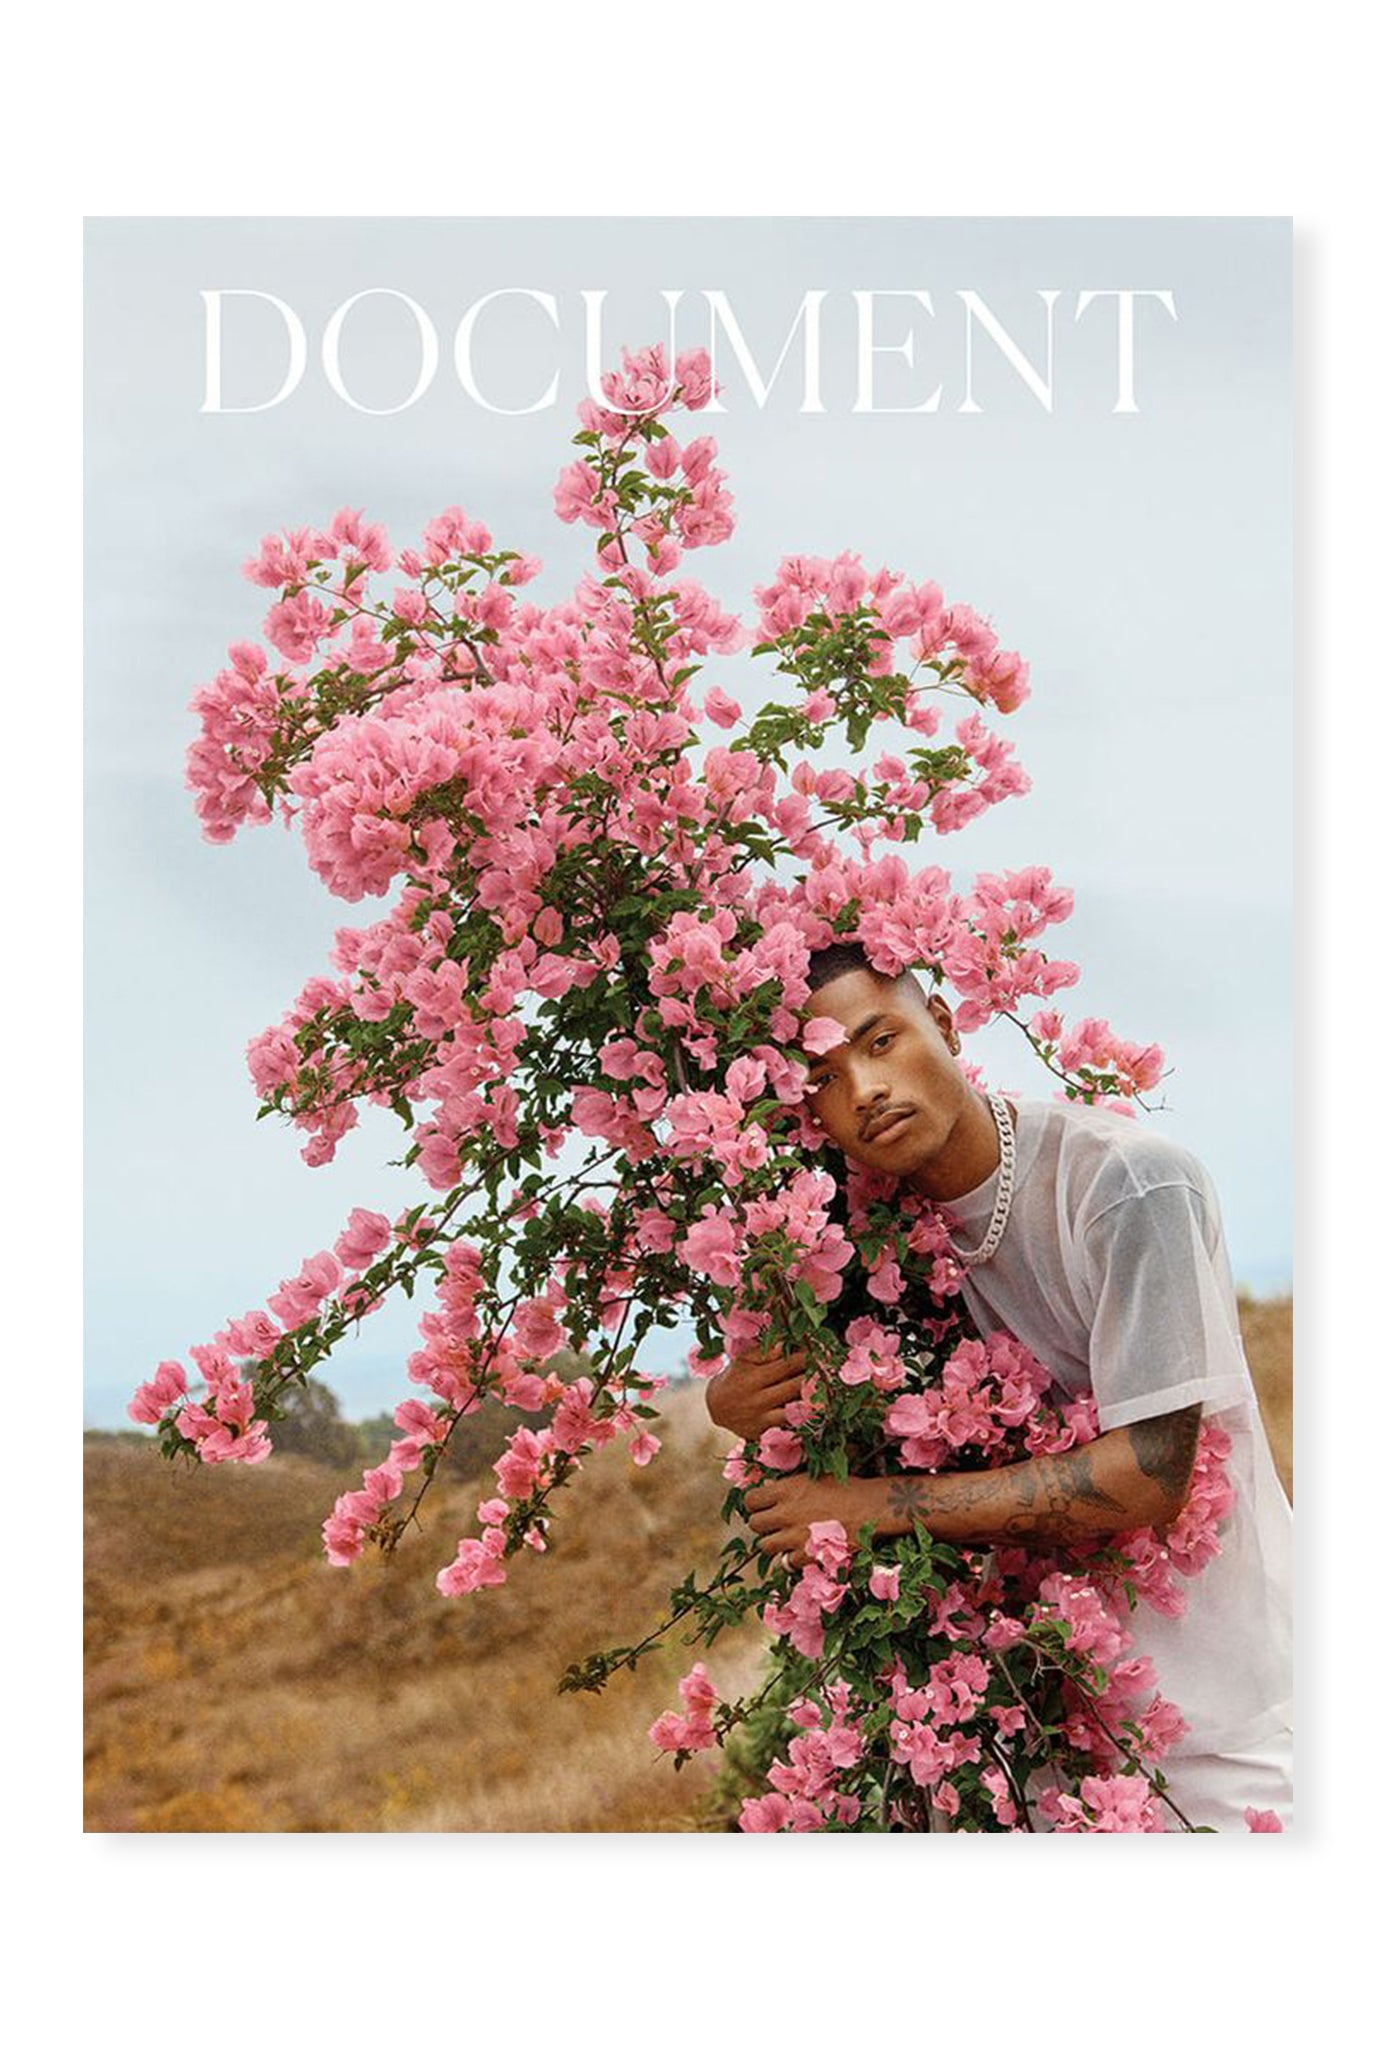 Document Journal, Issue 13